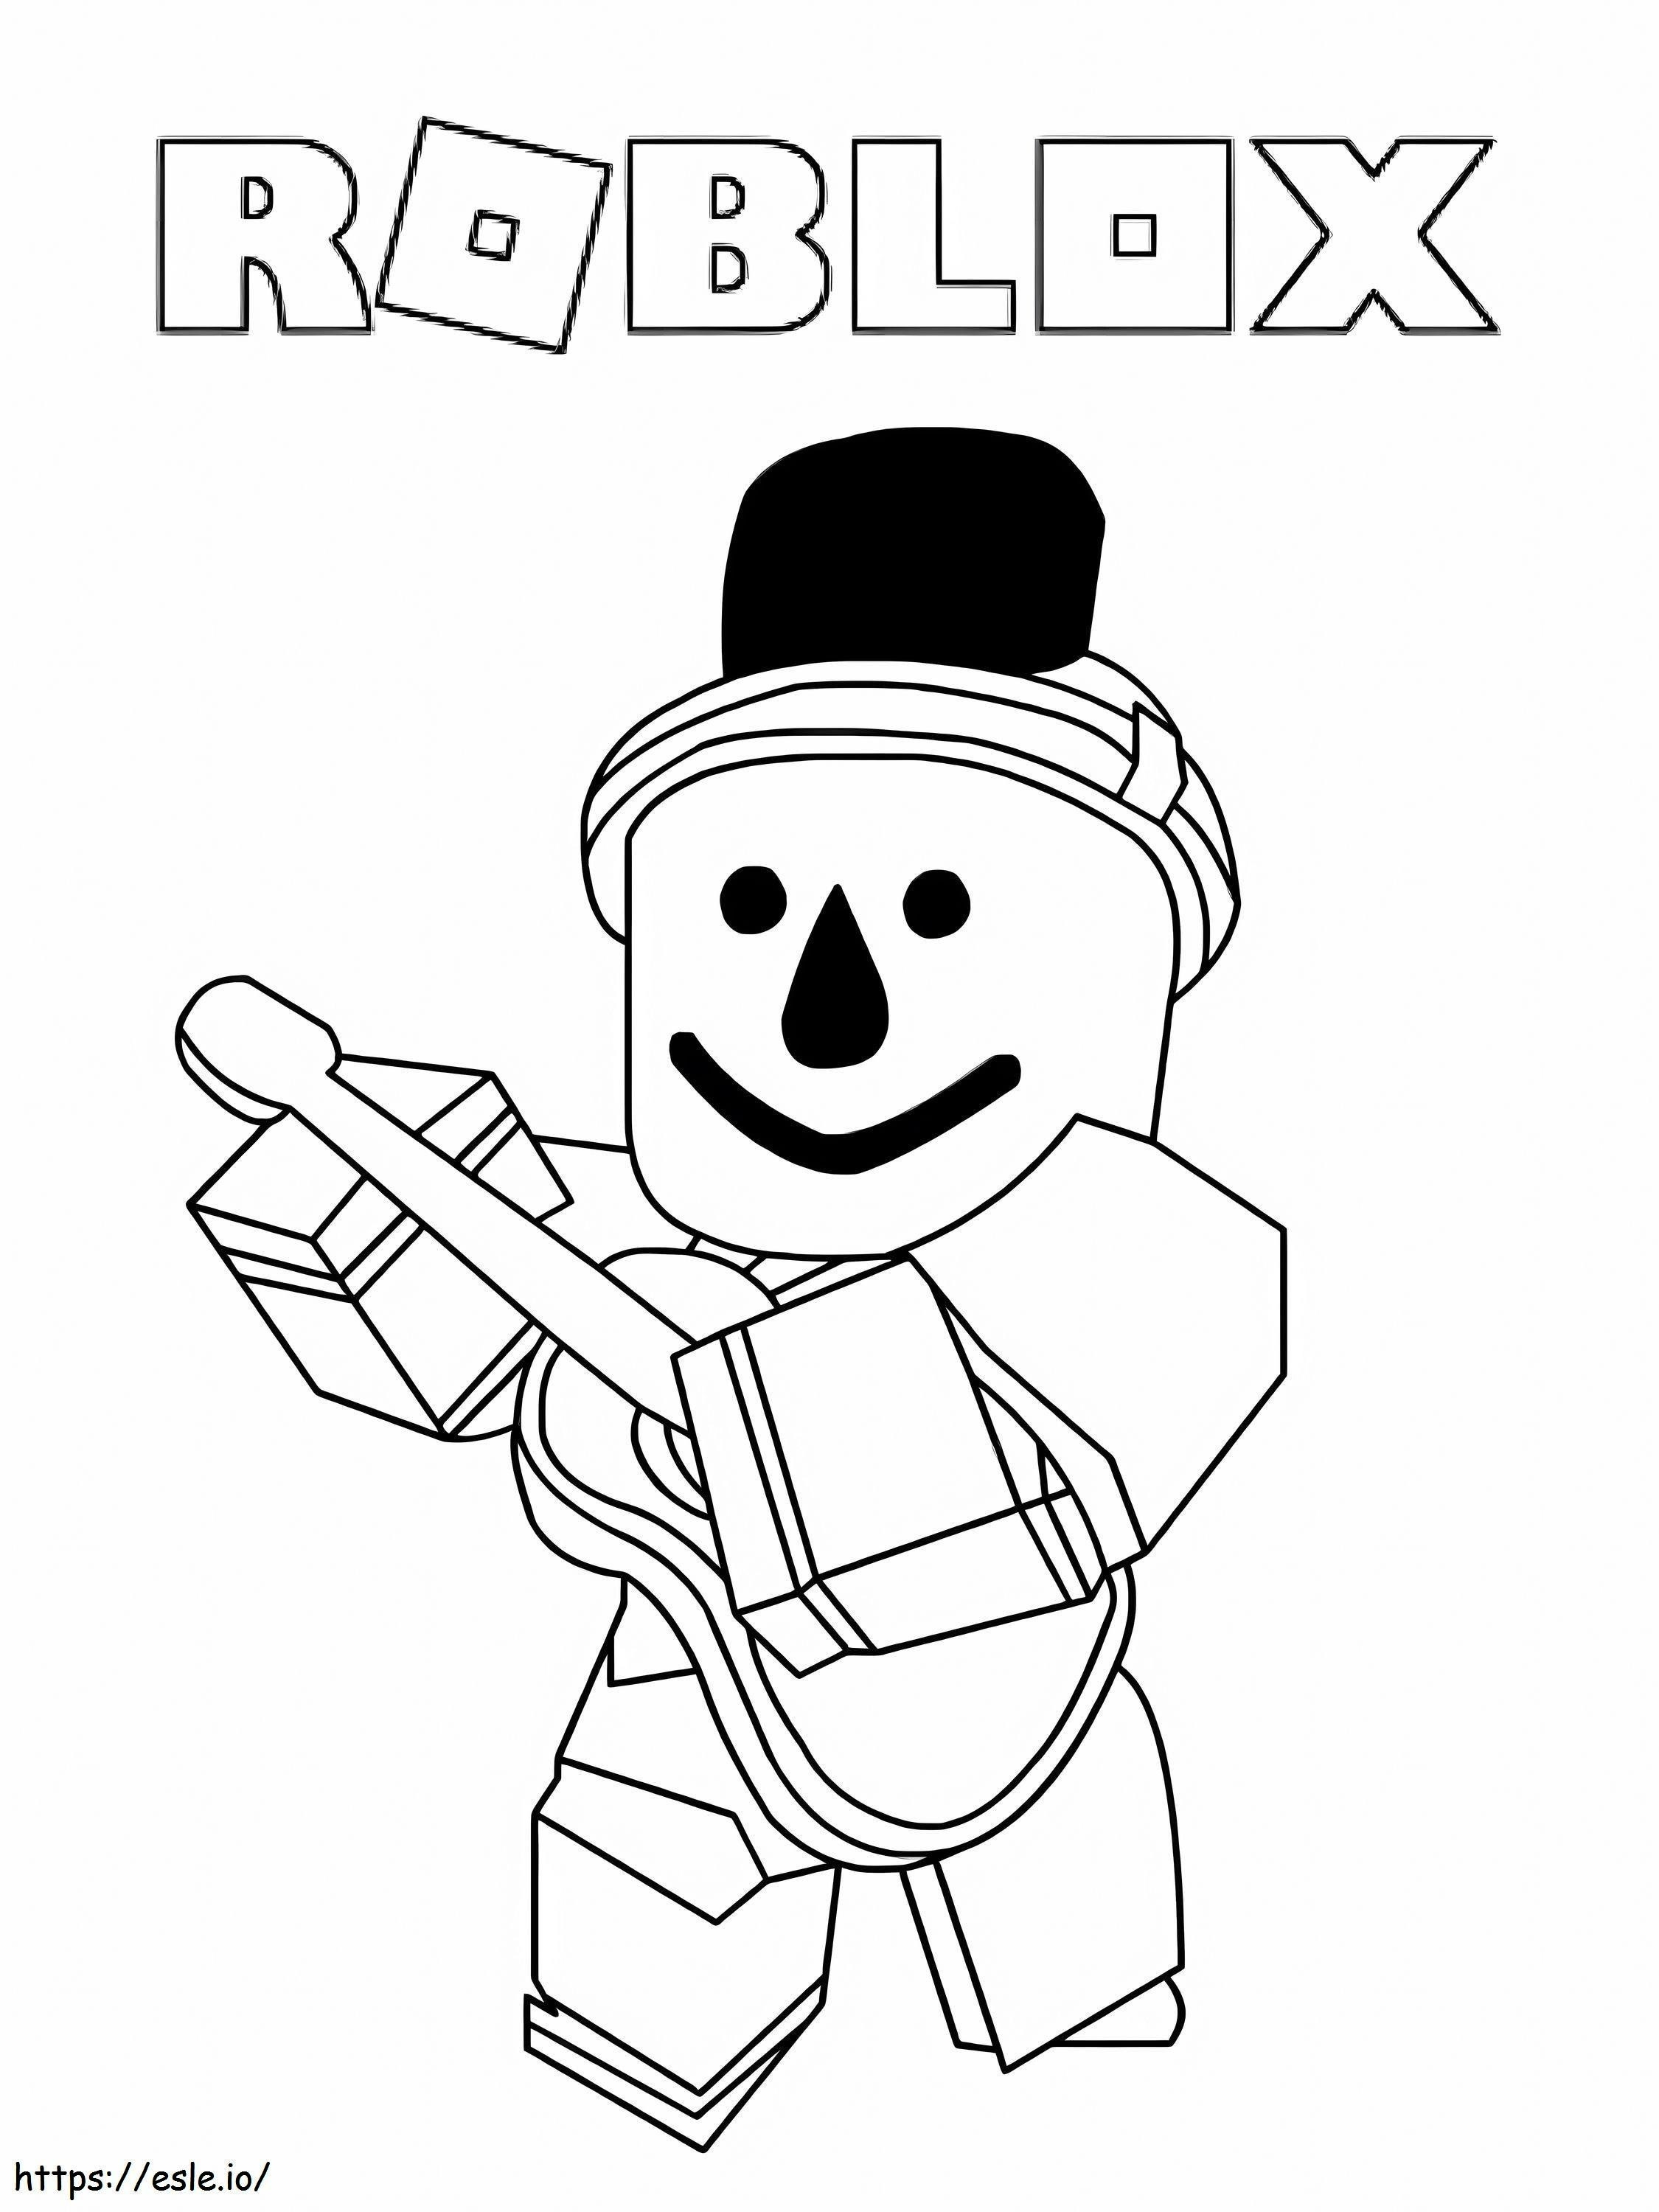 Roblox Playing Guitar coloring page